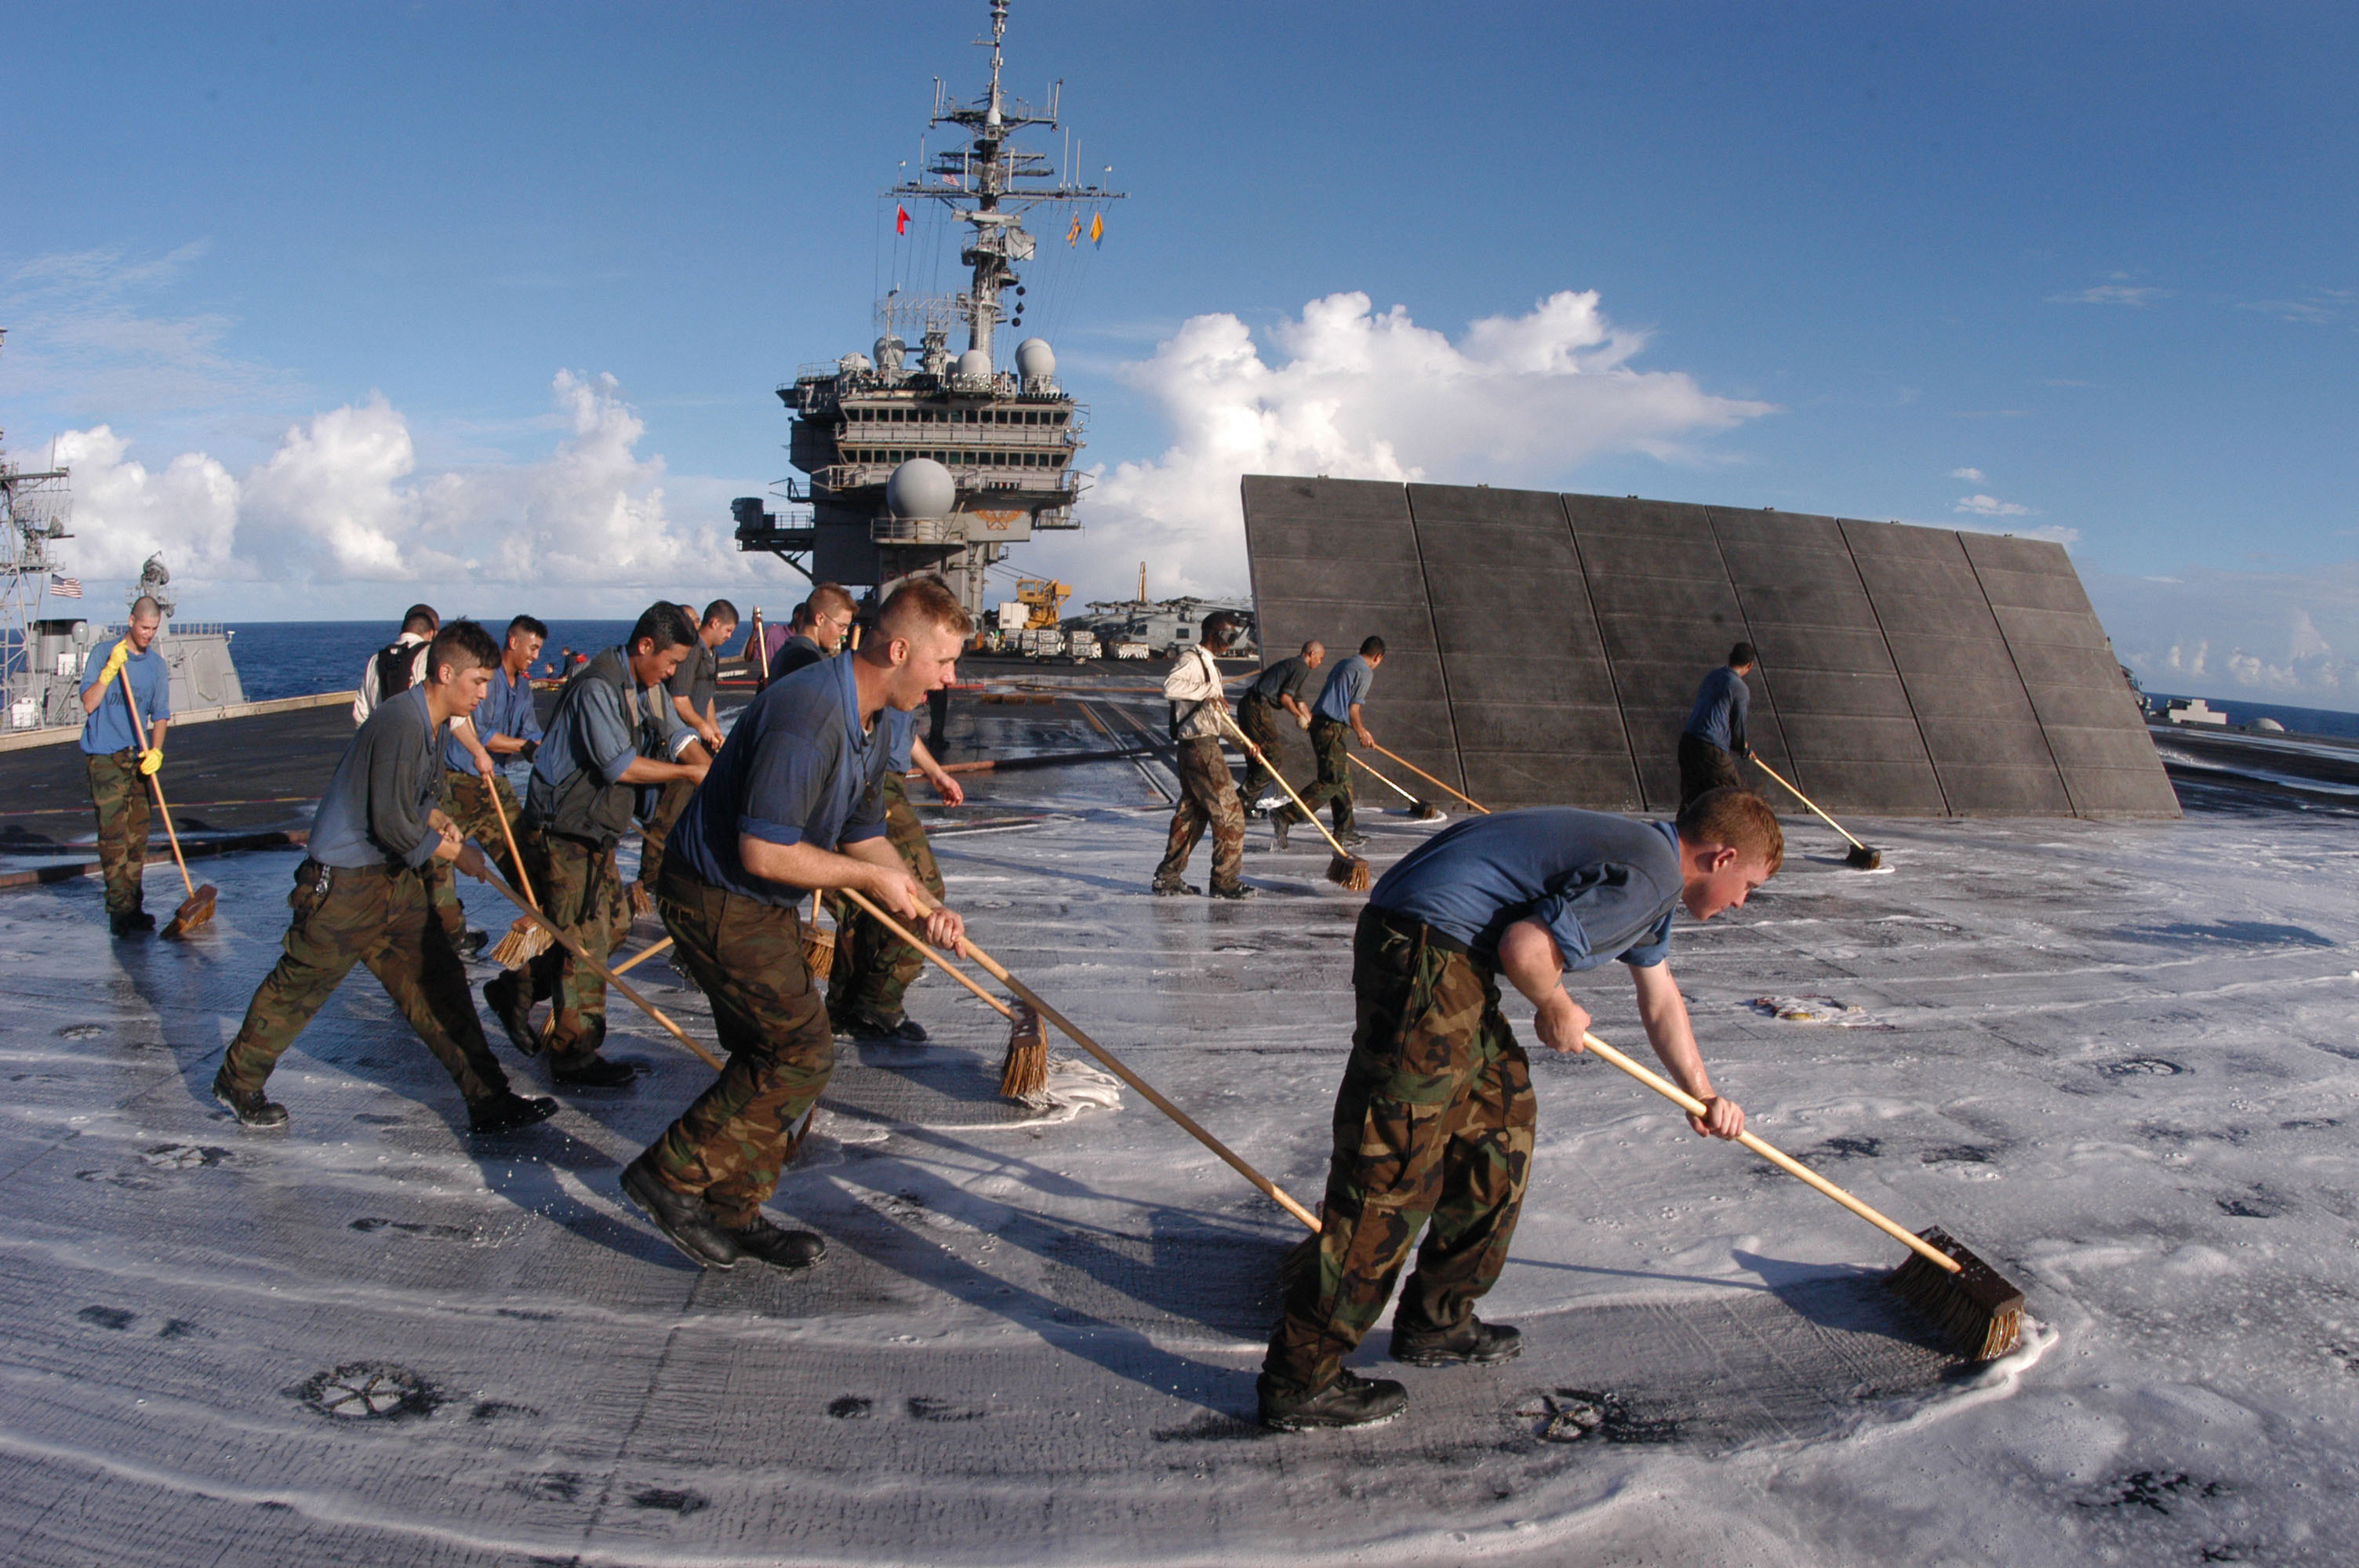 Airwing squadron members scrub the oil from the flight deck. This is done twice a week.